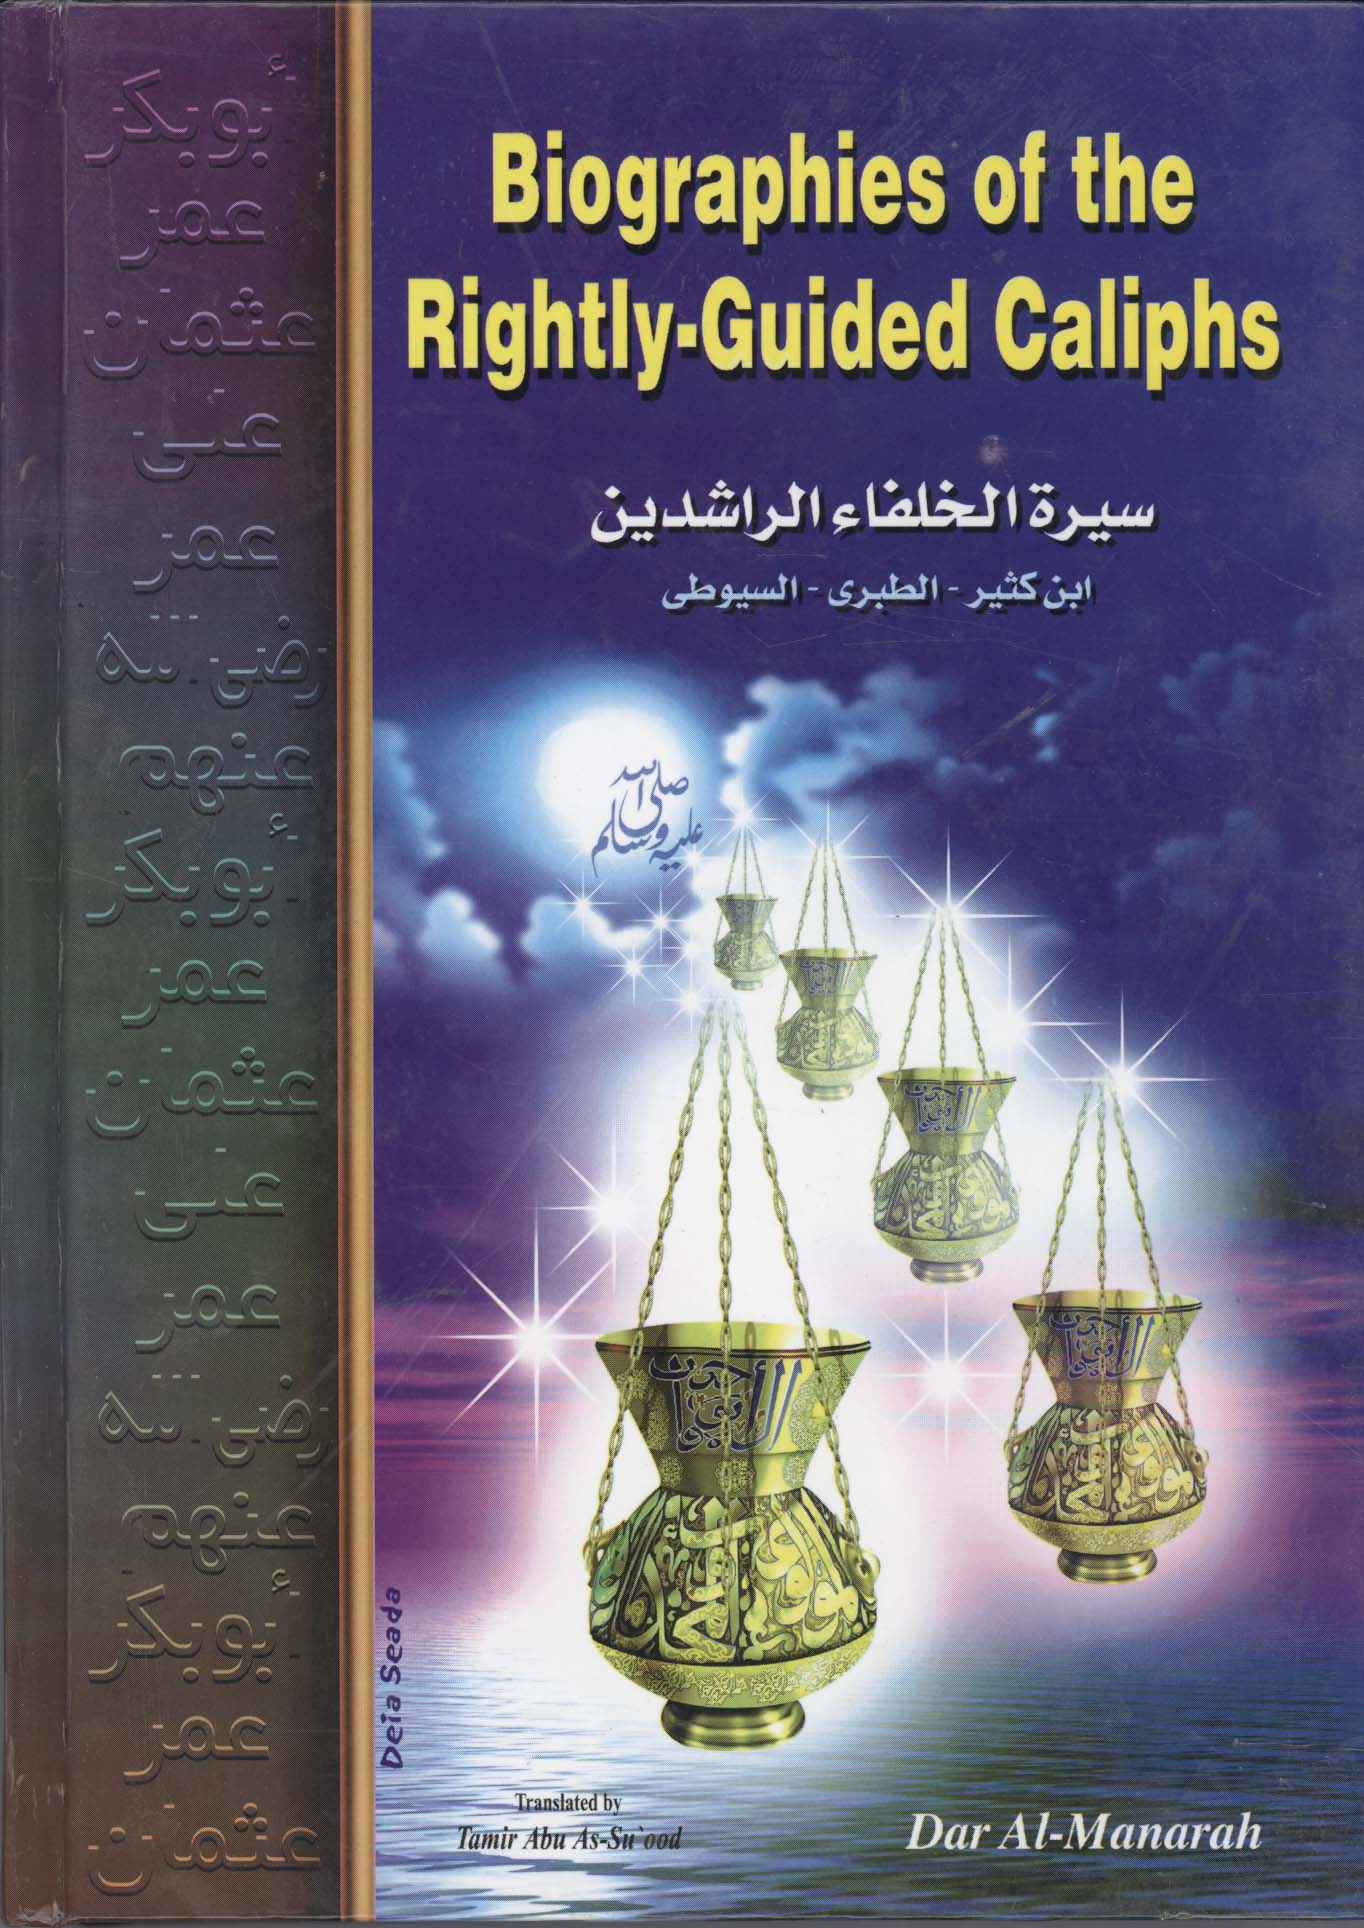 biographies of the righty- guided- caliphs  (from the works of ibn katheer tabari, as- syoti, and other historians)